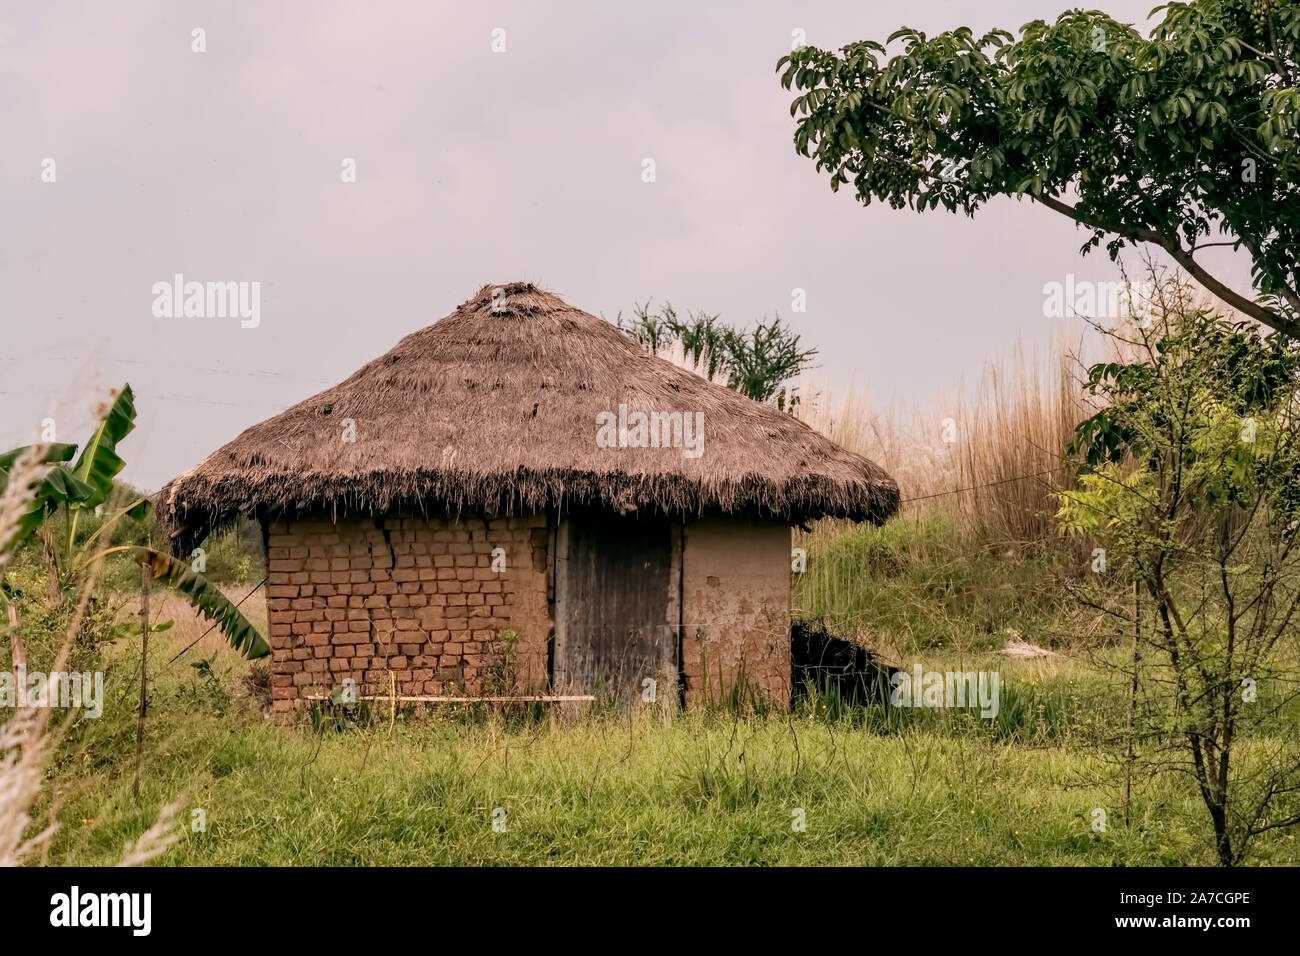 Thatched,cottage,made of,clay bricks,in a lonely ,place,Lalgarh,Jhargram,West Bengal,India Stock Photo